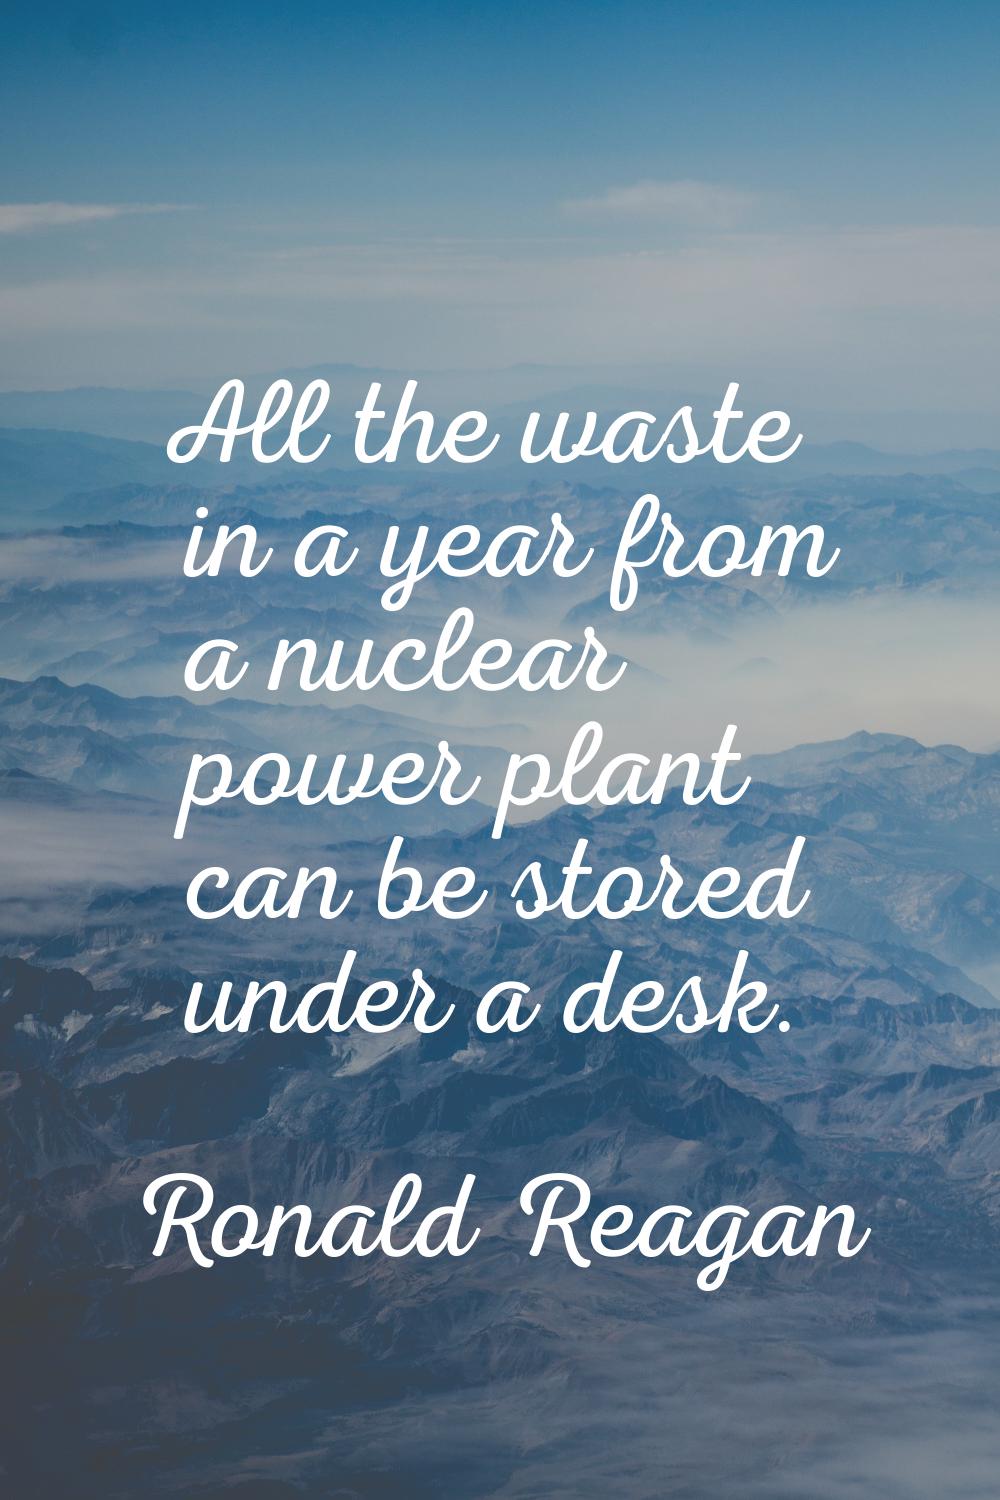 All the waste in a year from a nuclear power plant can be stored under a desk.